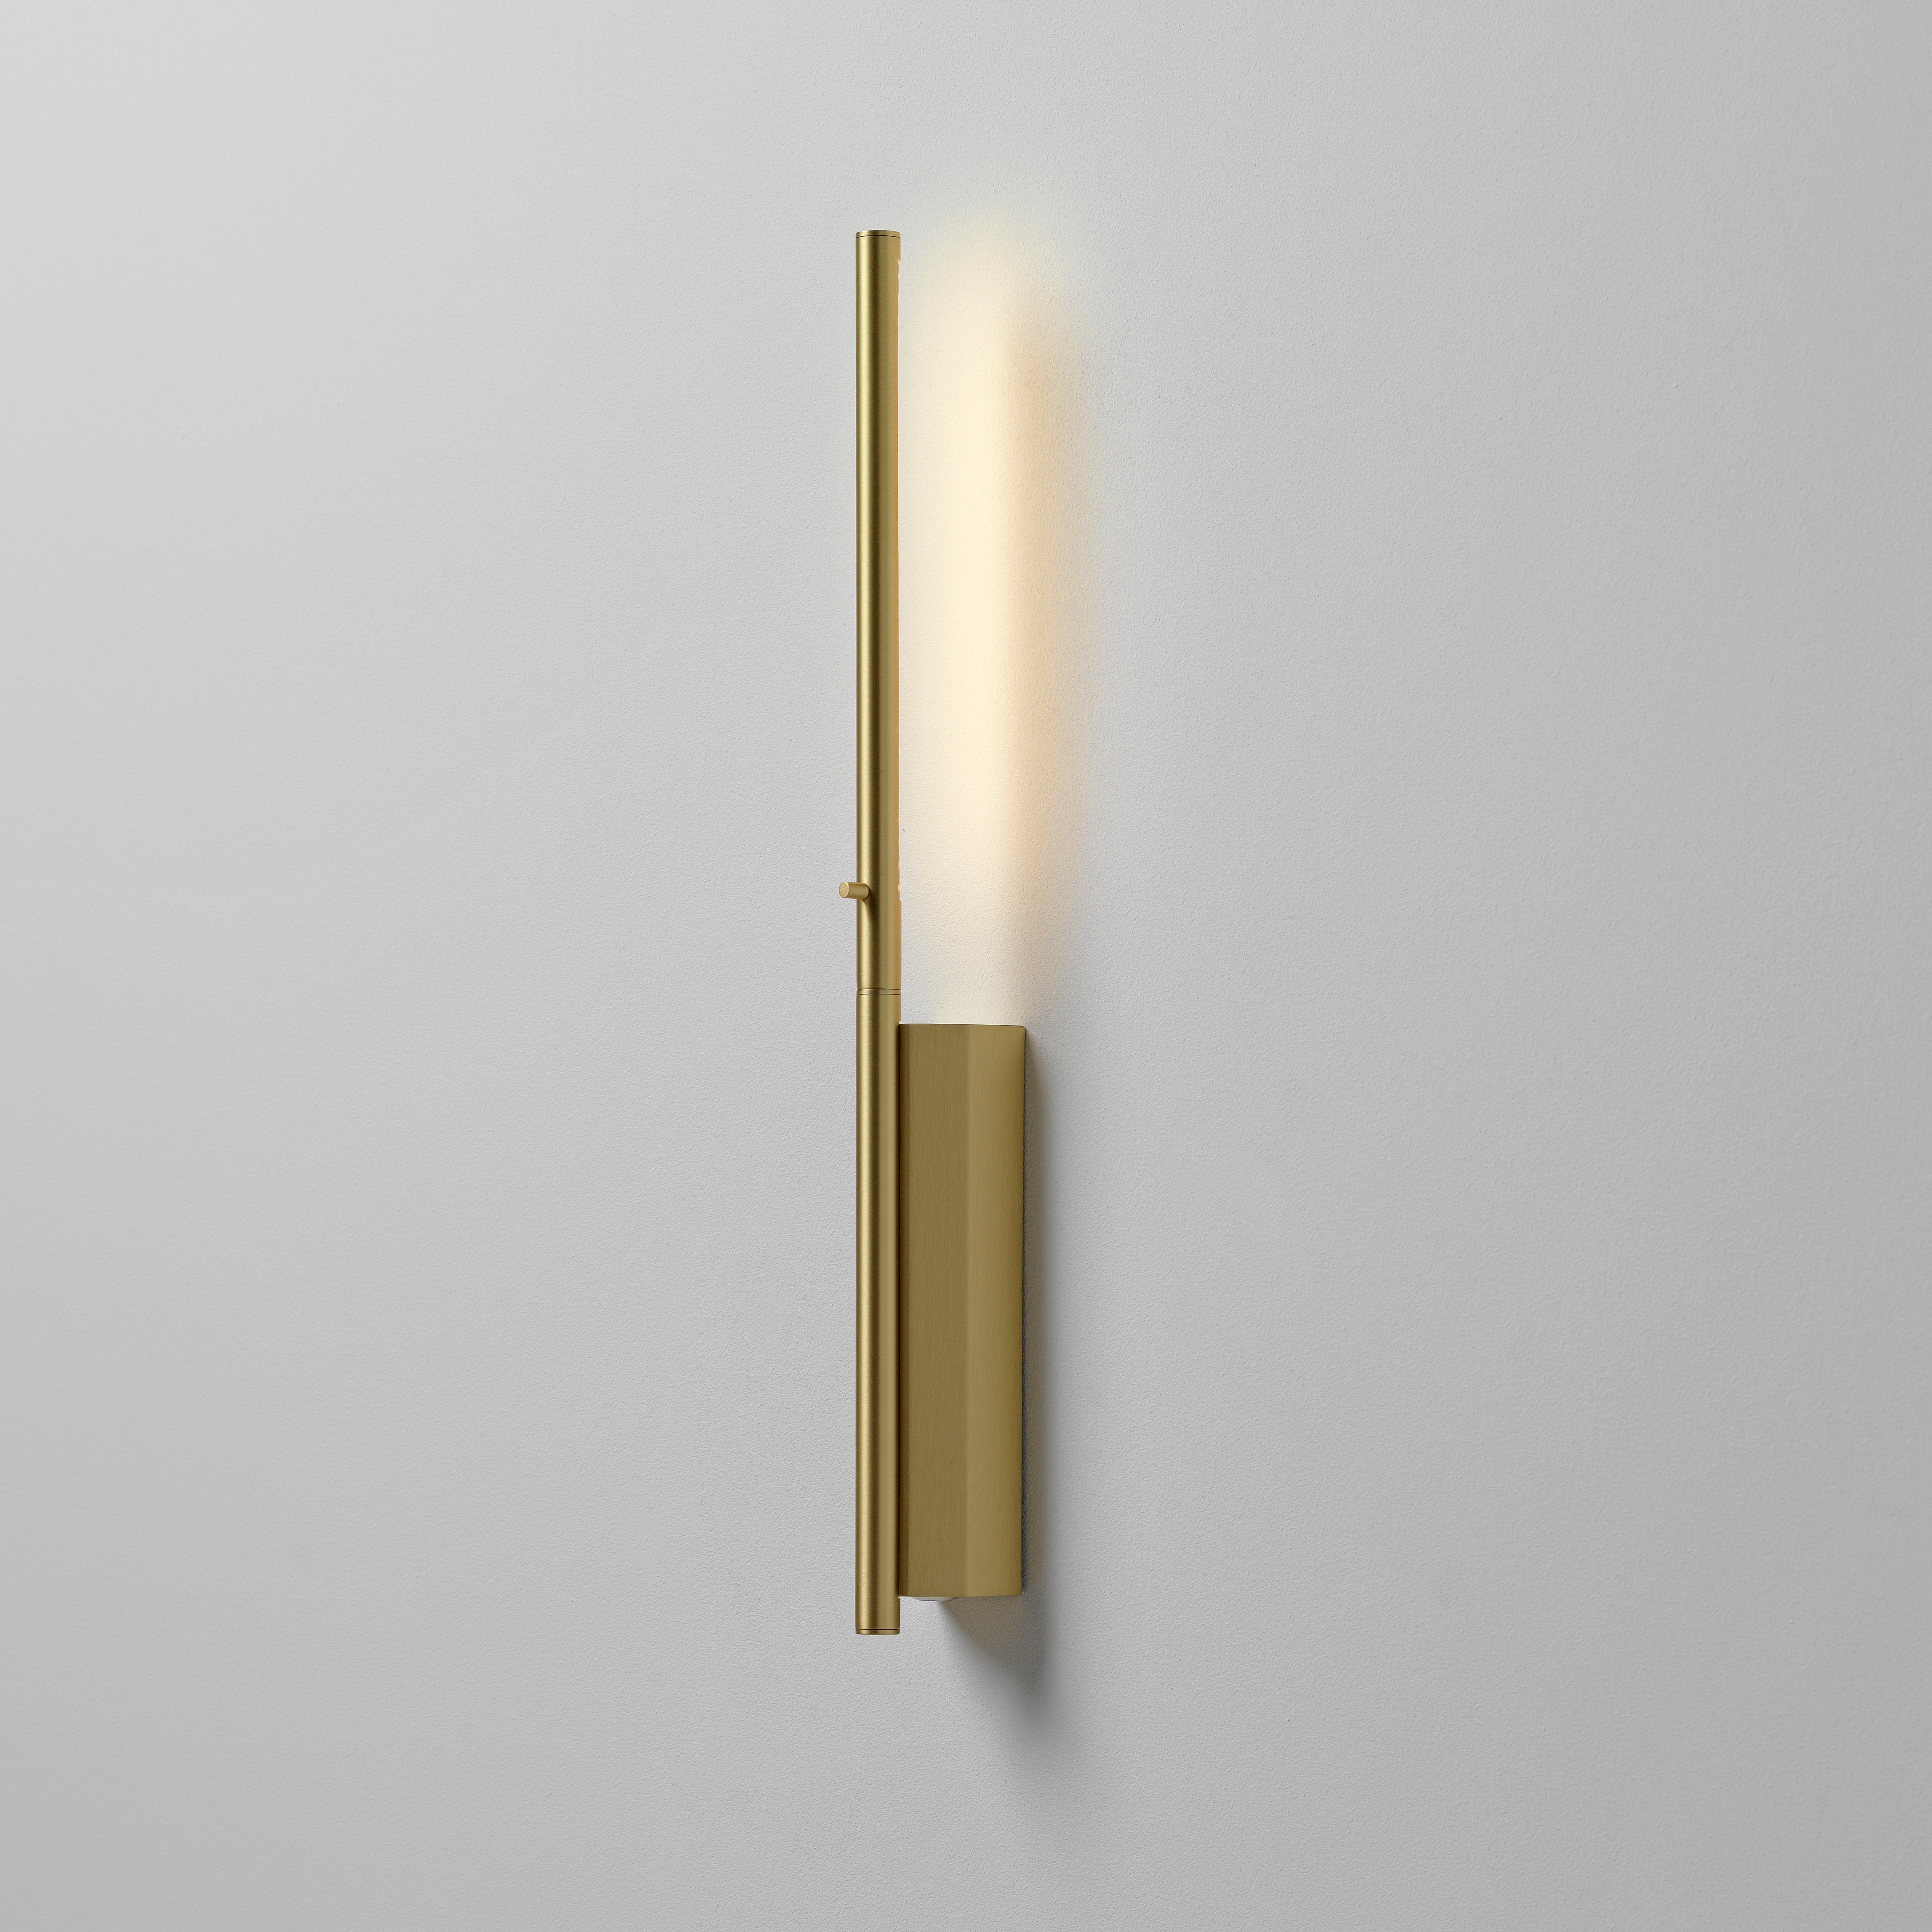 IP Link Reading Wall Light: Small